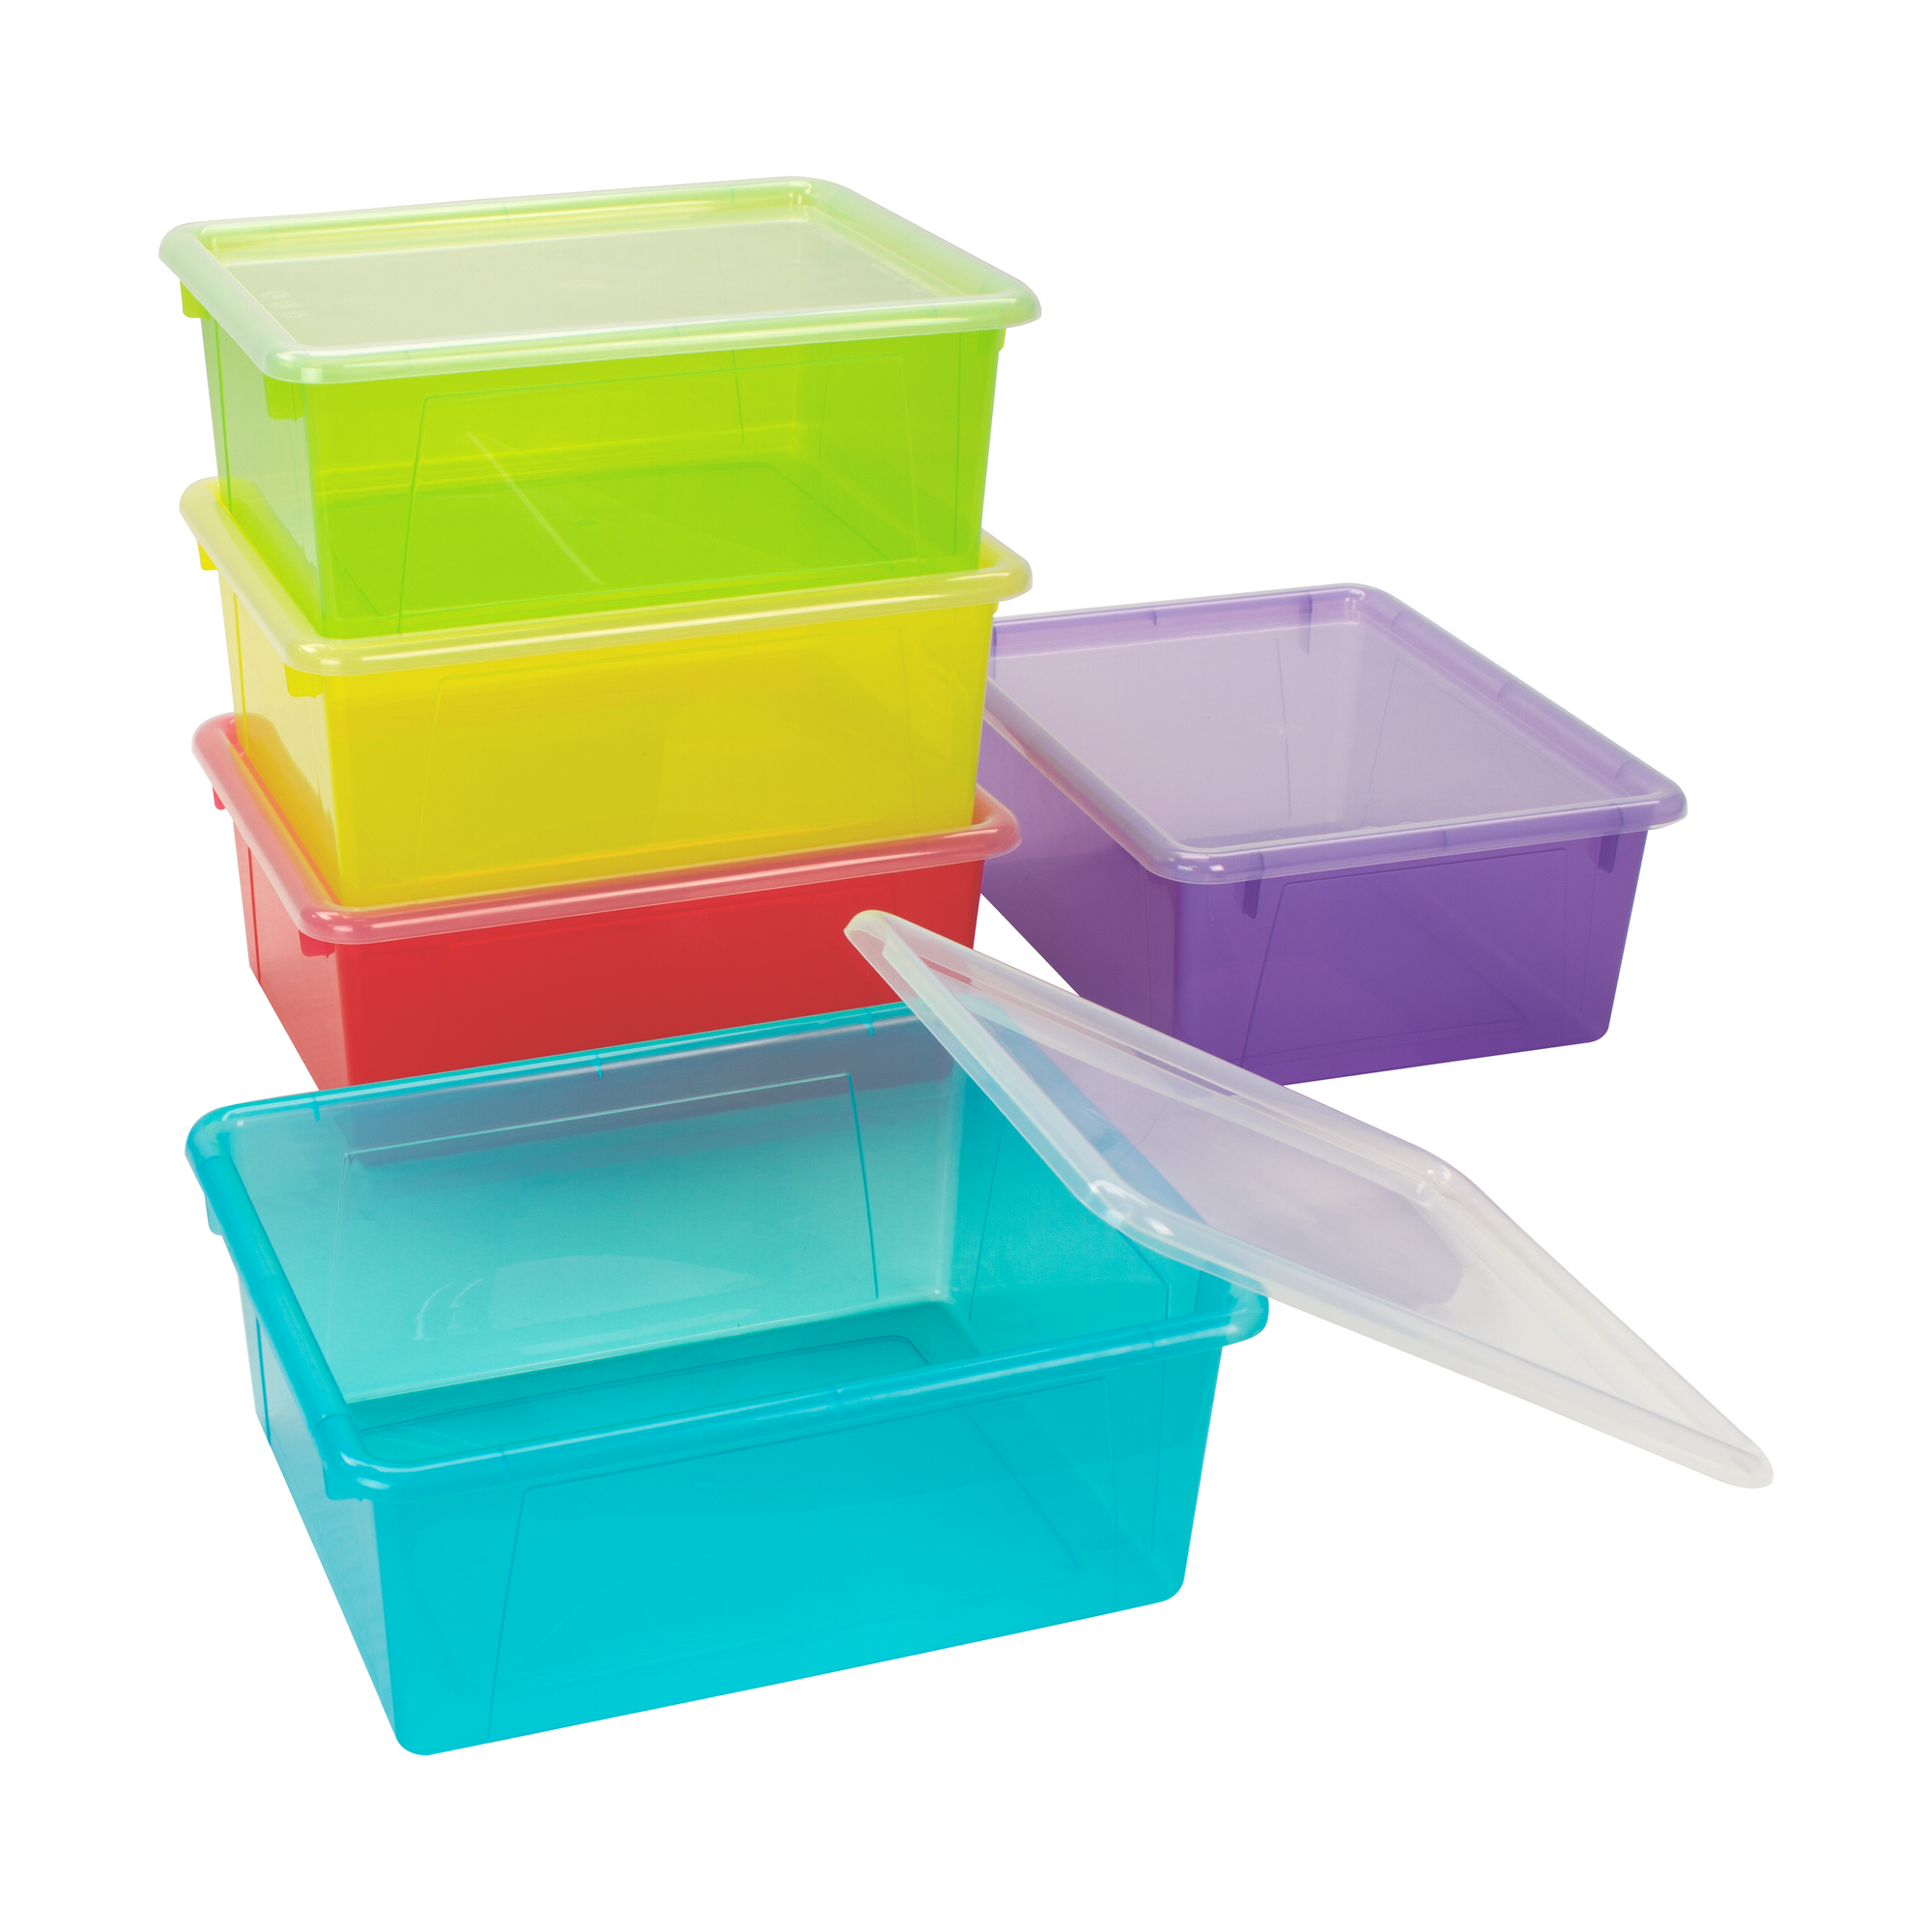 Storex Deep Storage Tray with Lid, Letter Size, 10 x 13 x 5 Inches, Assorted Tints, 5-Pack